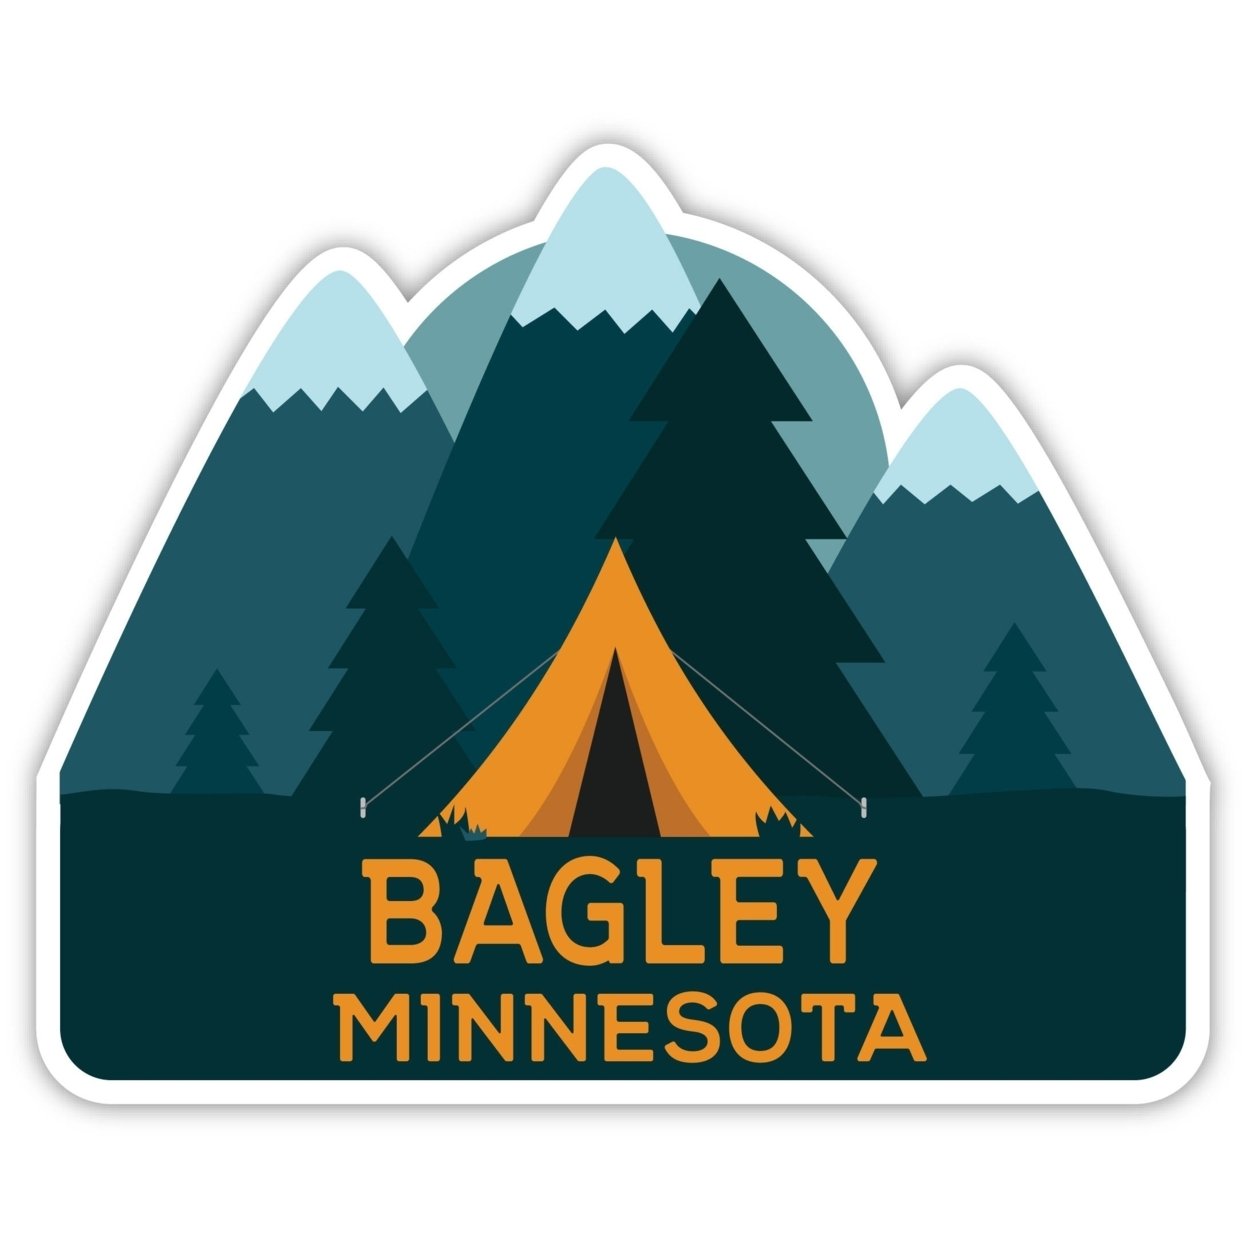 Bagley Minnesota Souvenir Decorative Stickers (Choose Theme And Size) - 4-Pack, 4-Inch, Tent